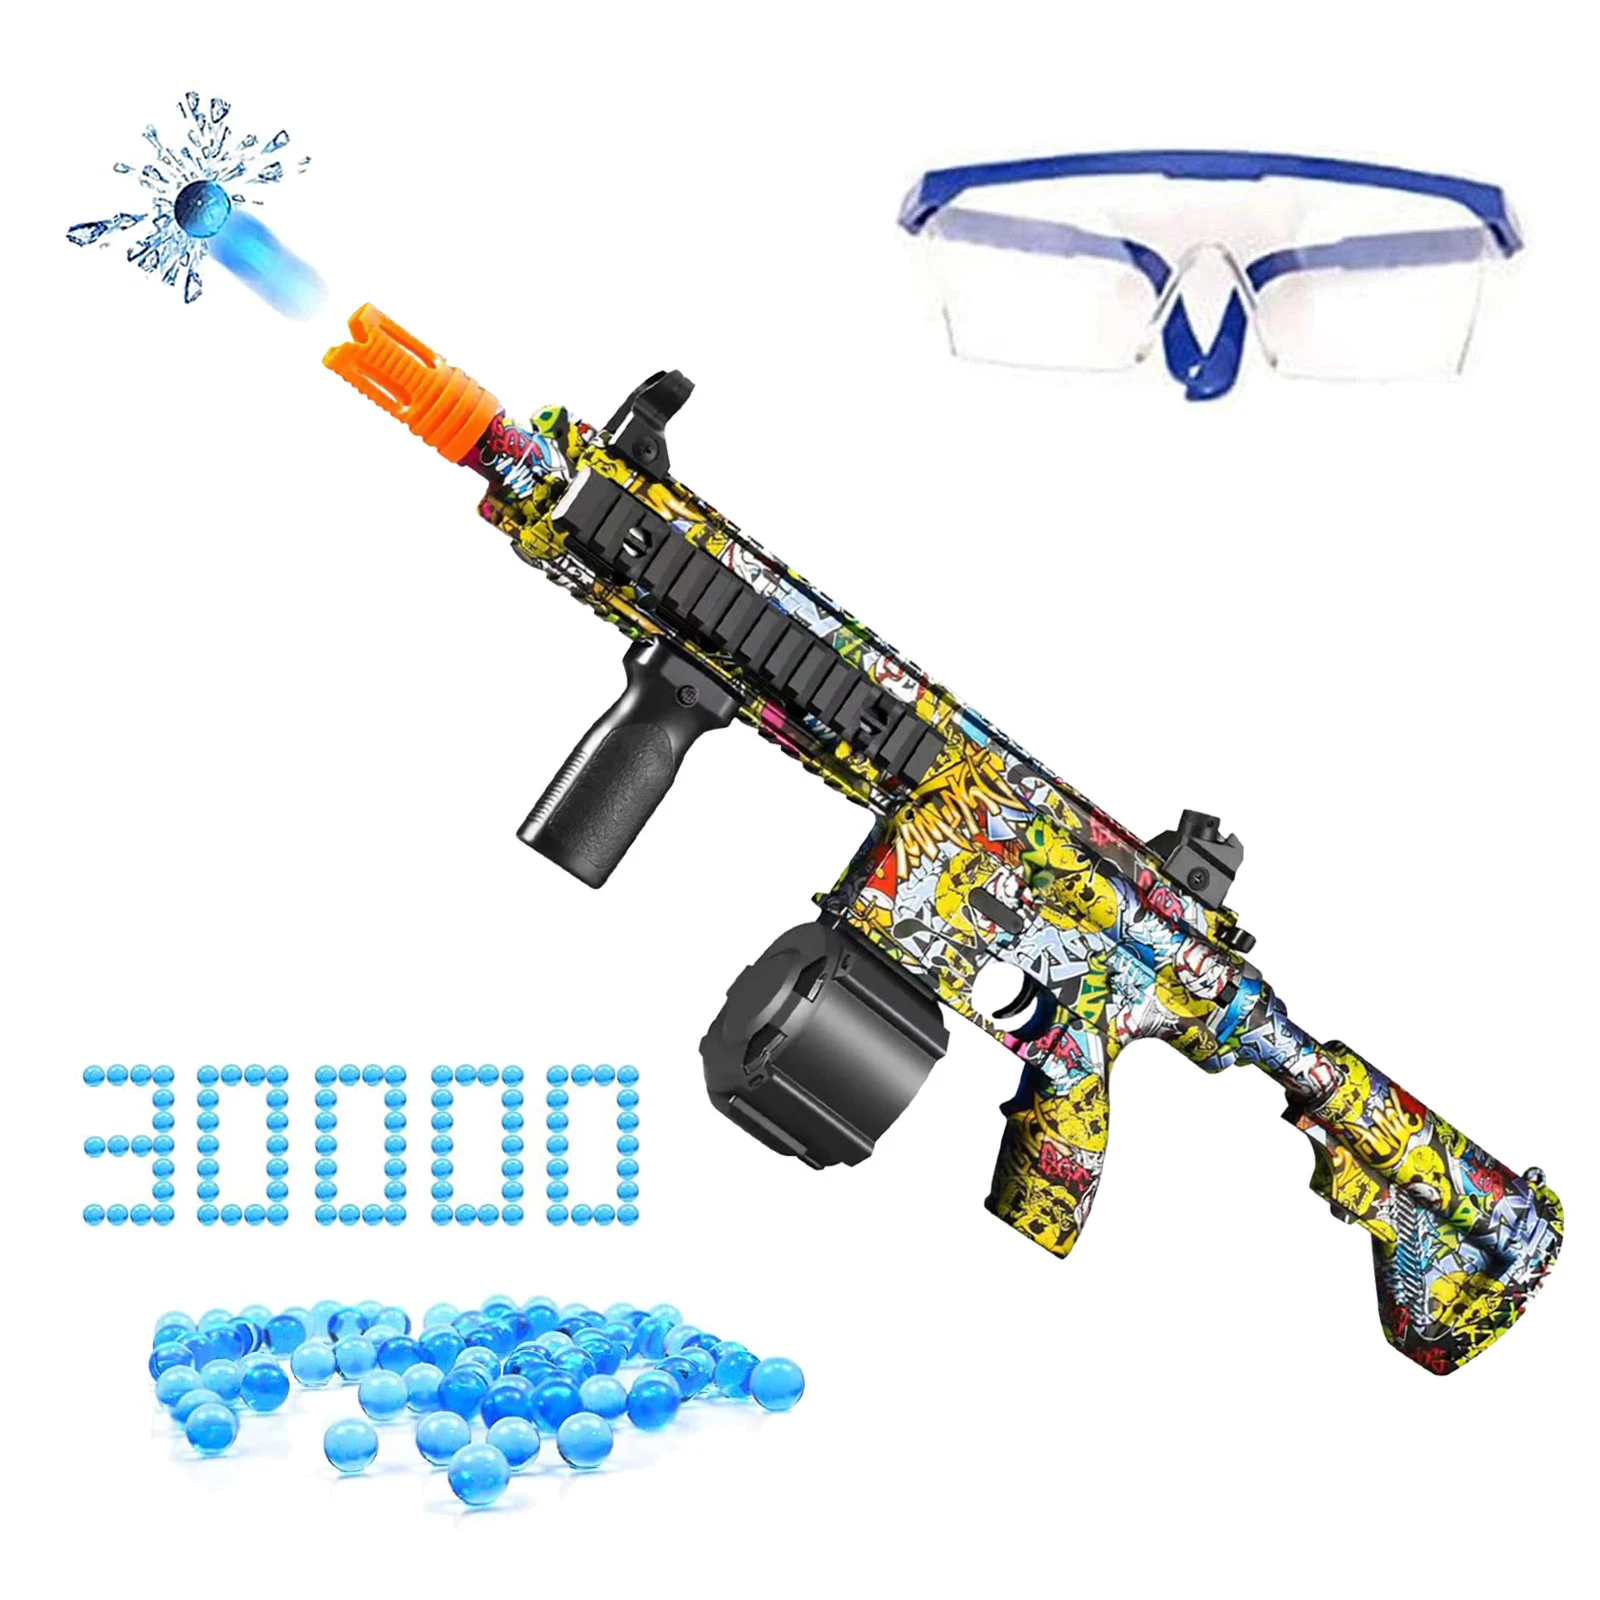 

New M416 Manual & Electric Splatter Gun 2-in-1 Gel Ball Blaster With 30000 Eco-Friendly Water Beads Goggles For Outdoor Toys